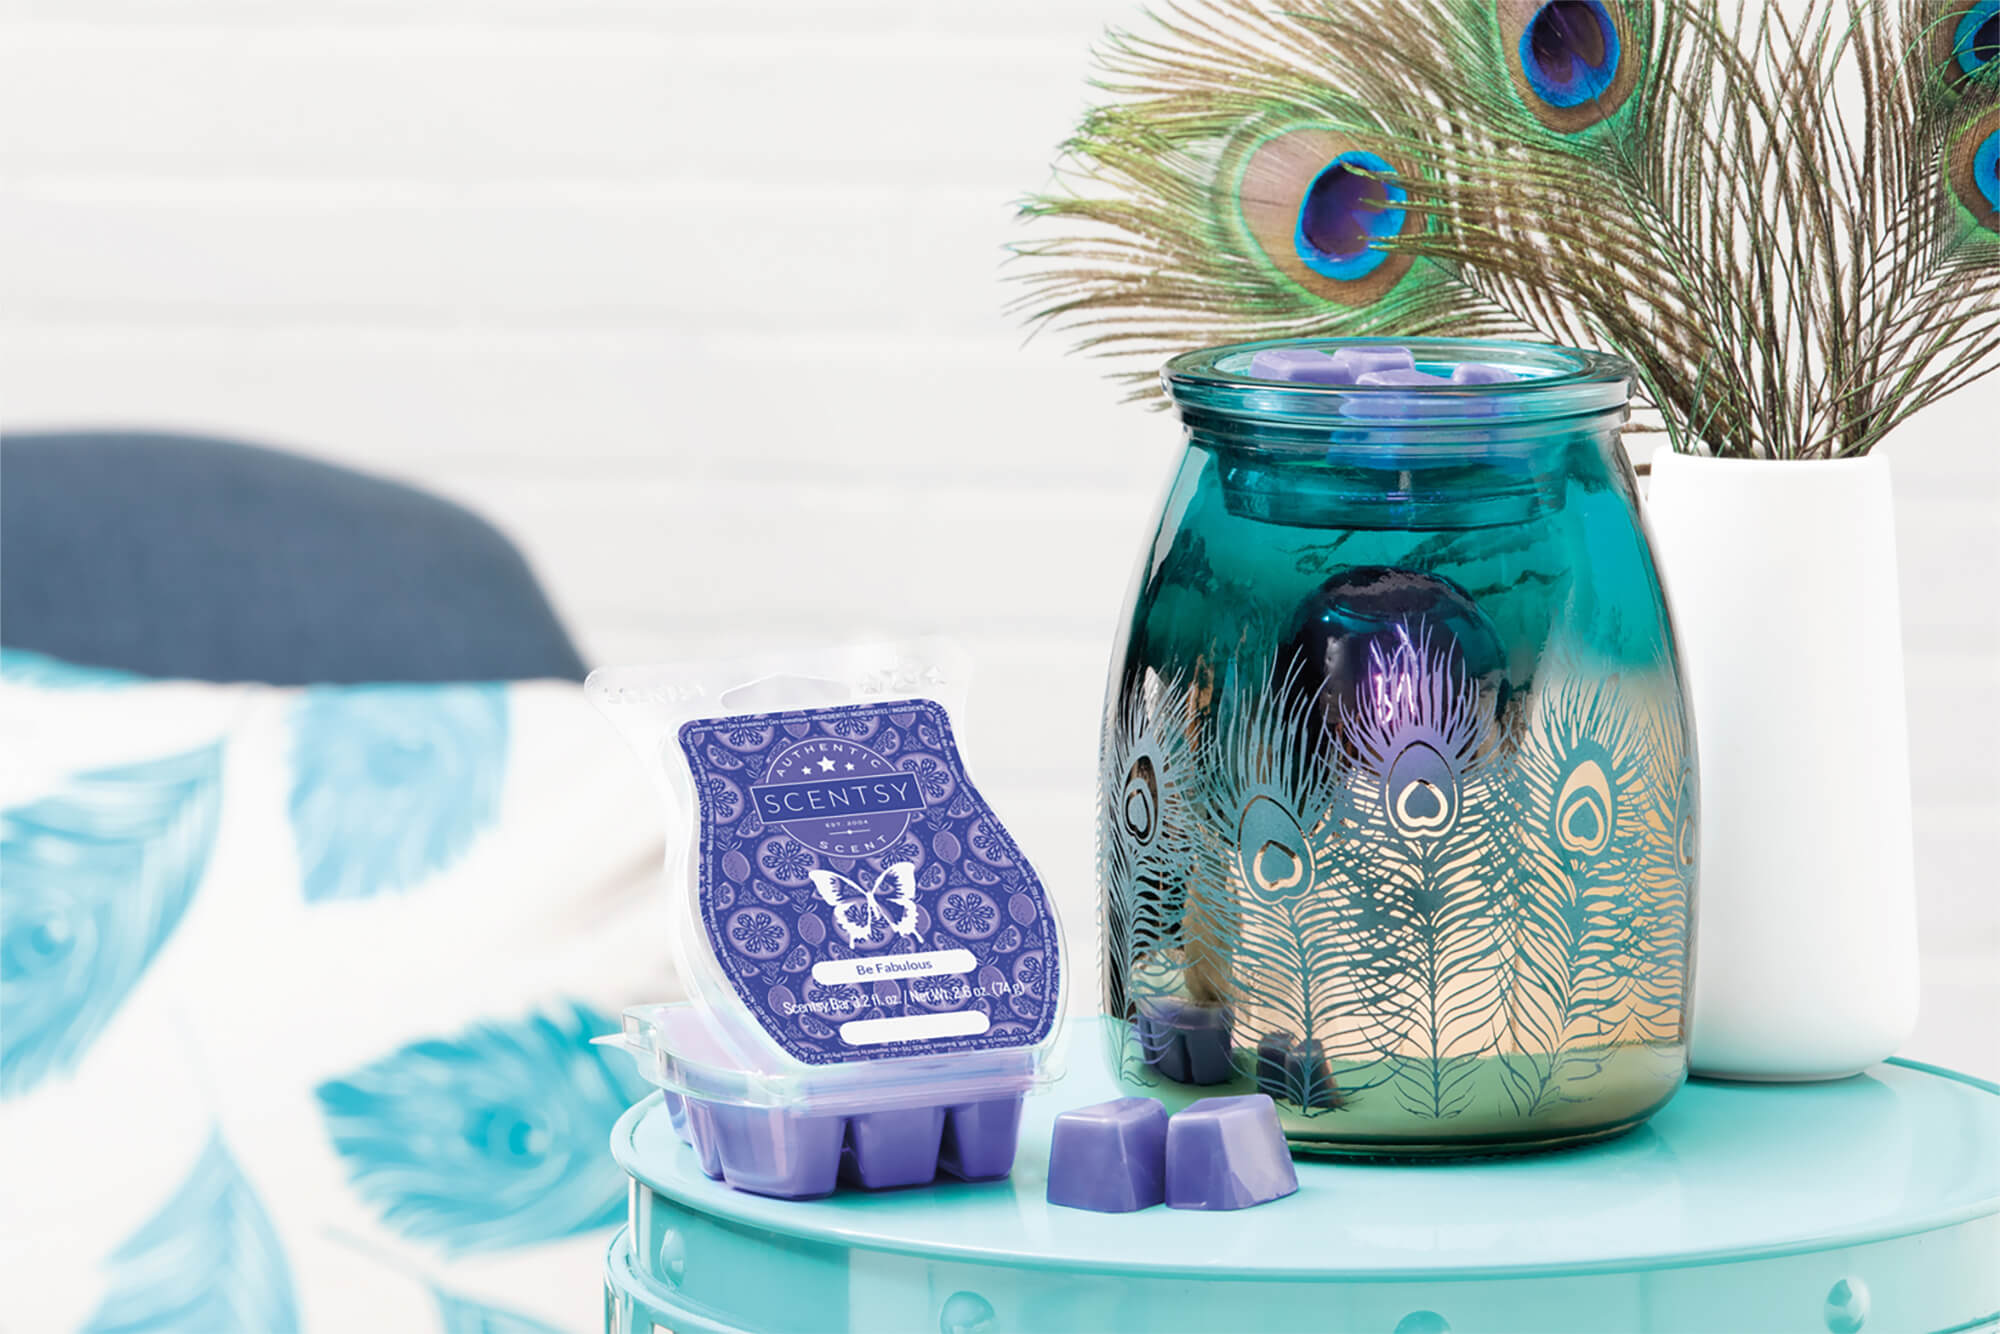 Scentsy's Warmer of the Month, Be bold and their Scent of the Month, Be Fabulous